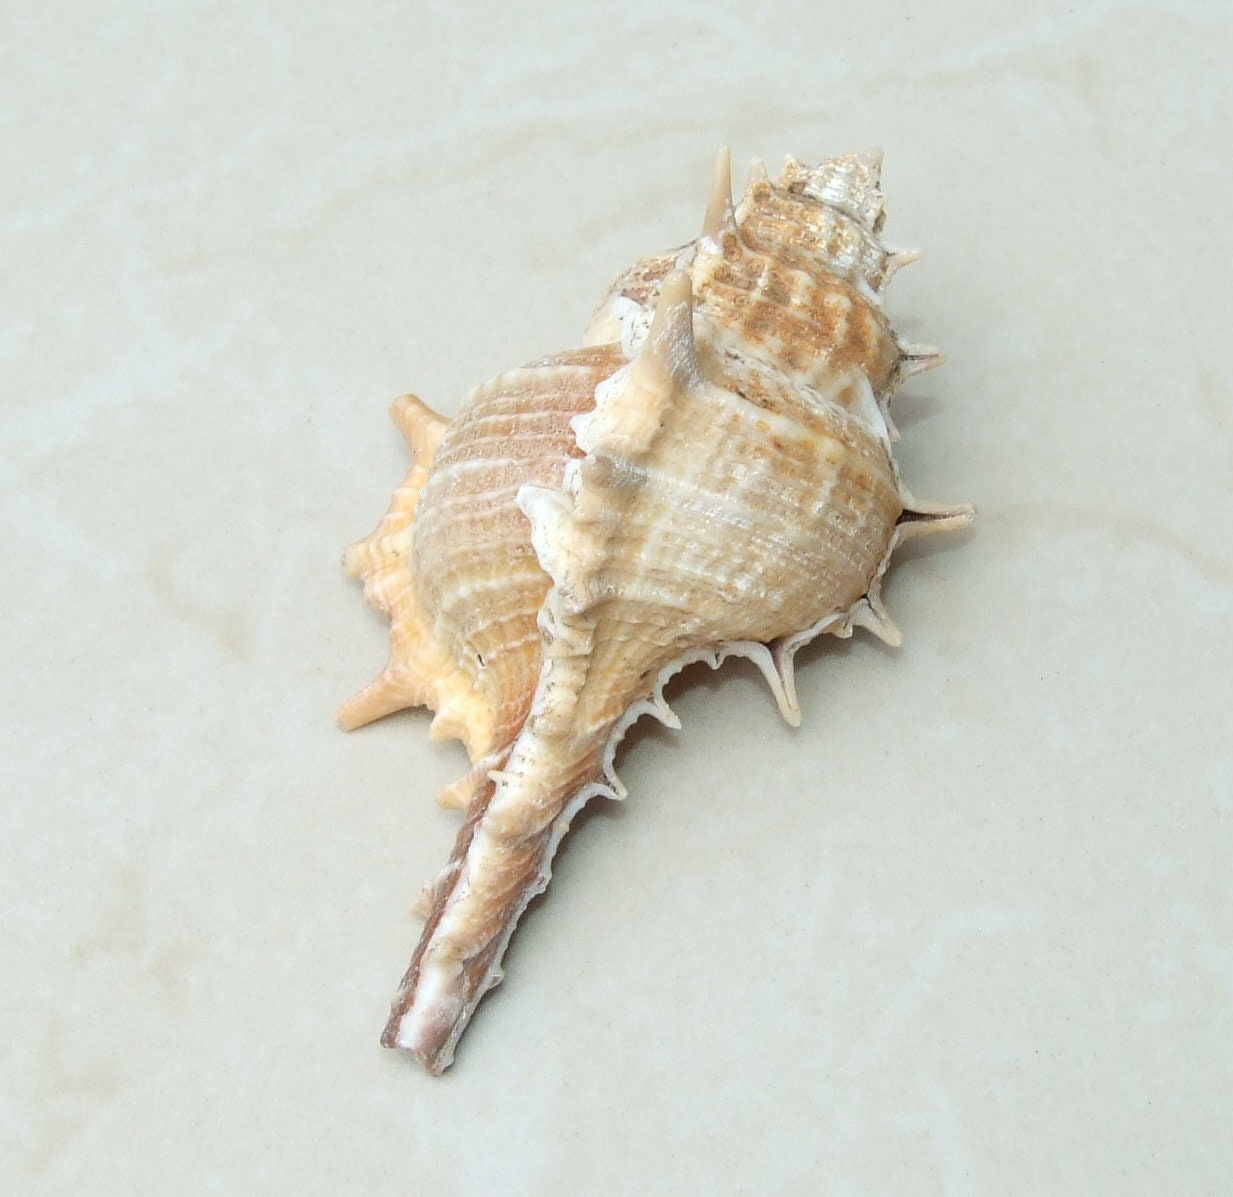 Natural Murex Turnispina Seashell, Spiral Shell Bead, Display Shell, Craft Shell, Jewelry Shell, Conch Shell, Beach Decor, Drilled, 40-70mm